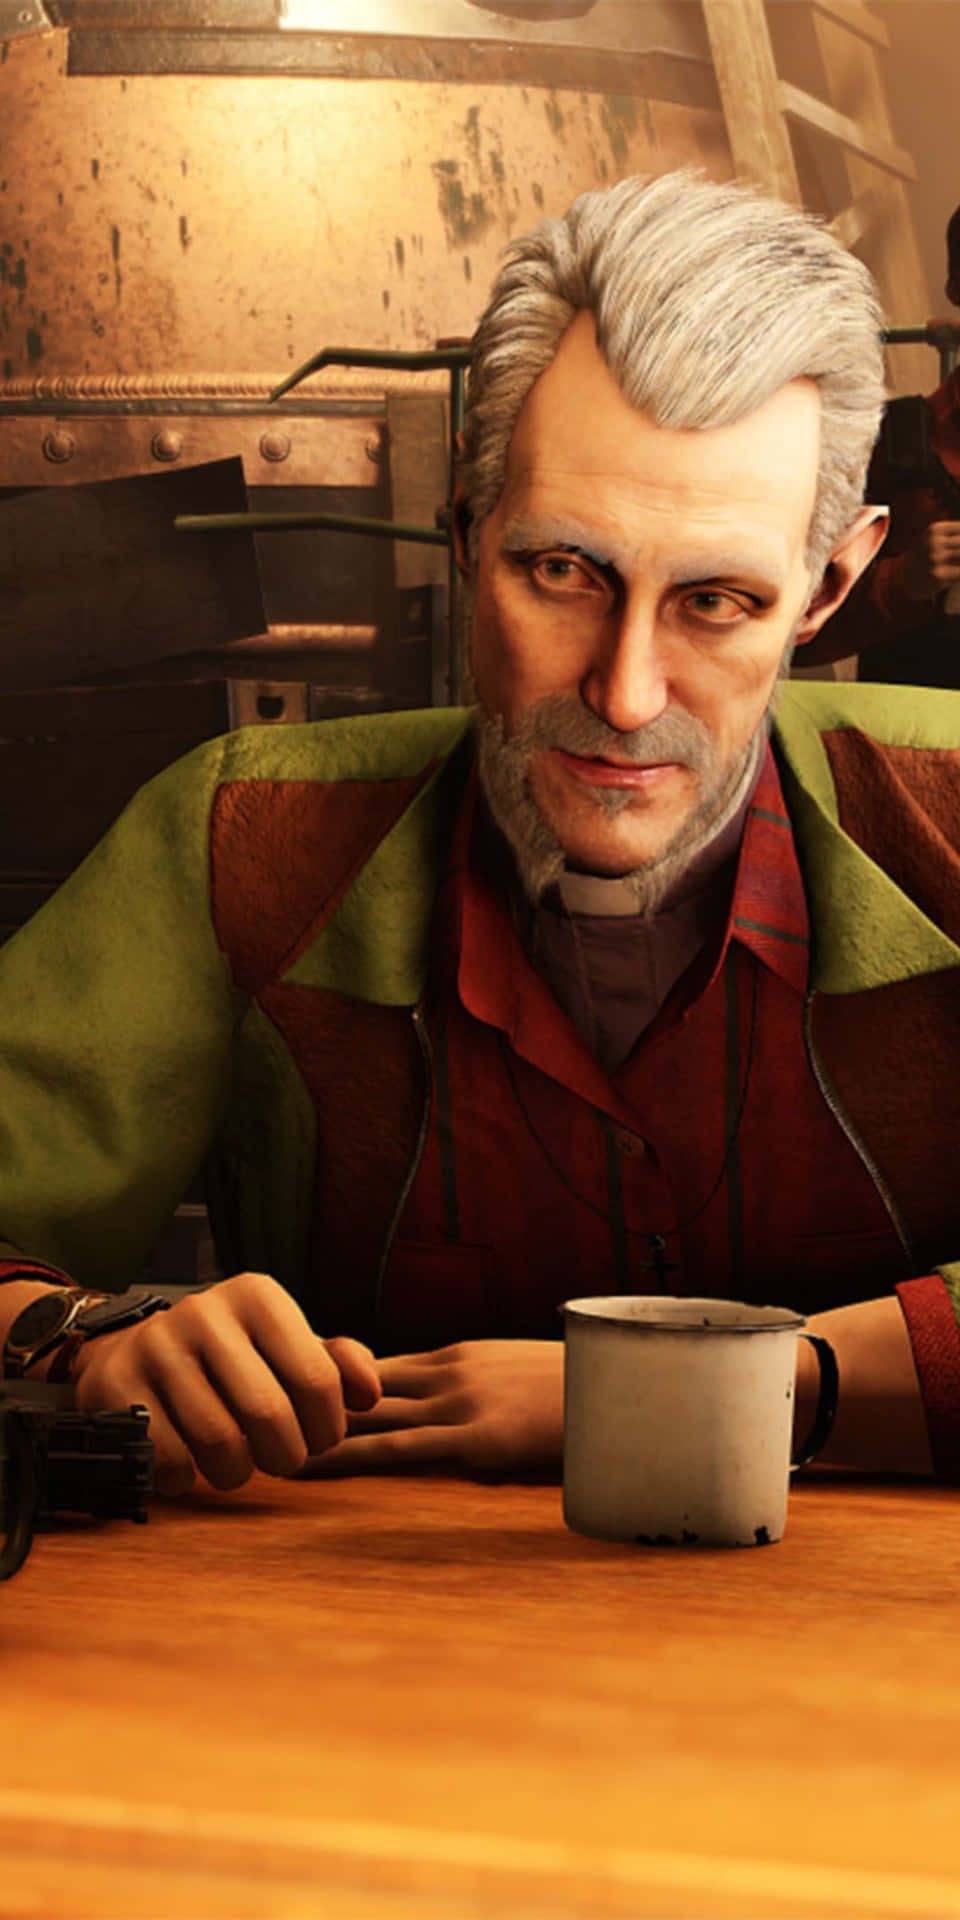 A Man Sitting At A Table With A Cup Of Coffee